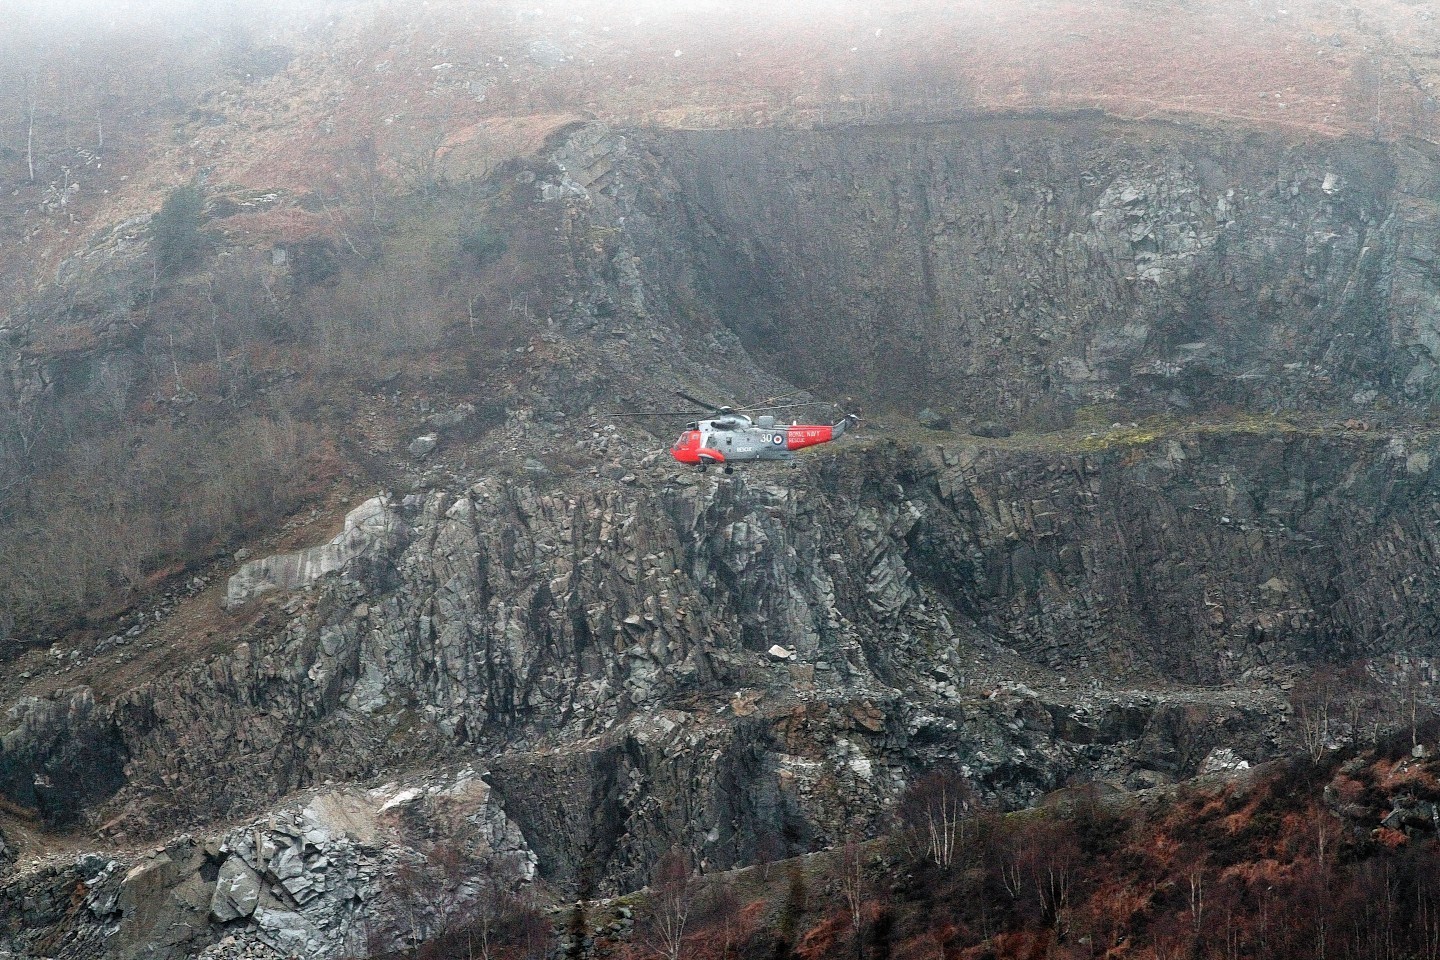 Search and rescue teams near Oban after the plane had crashed